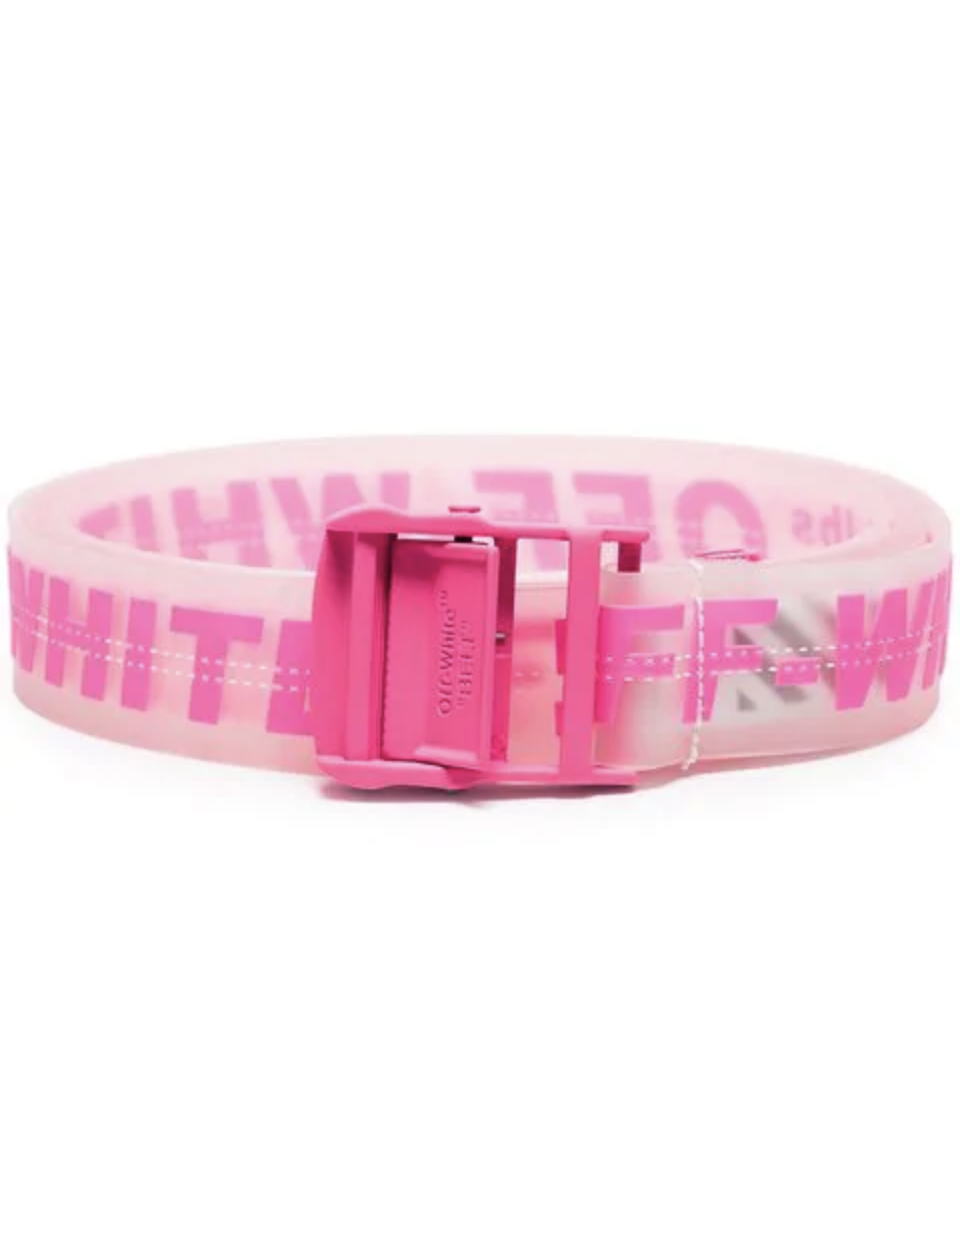 Off-White Rubber Industrial Belt - Pink - Selectionne PH